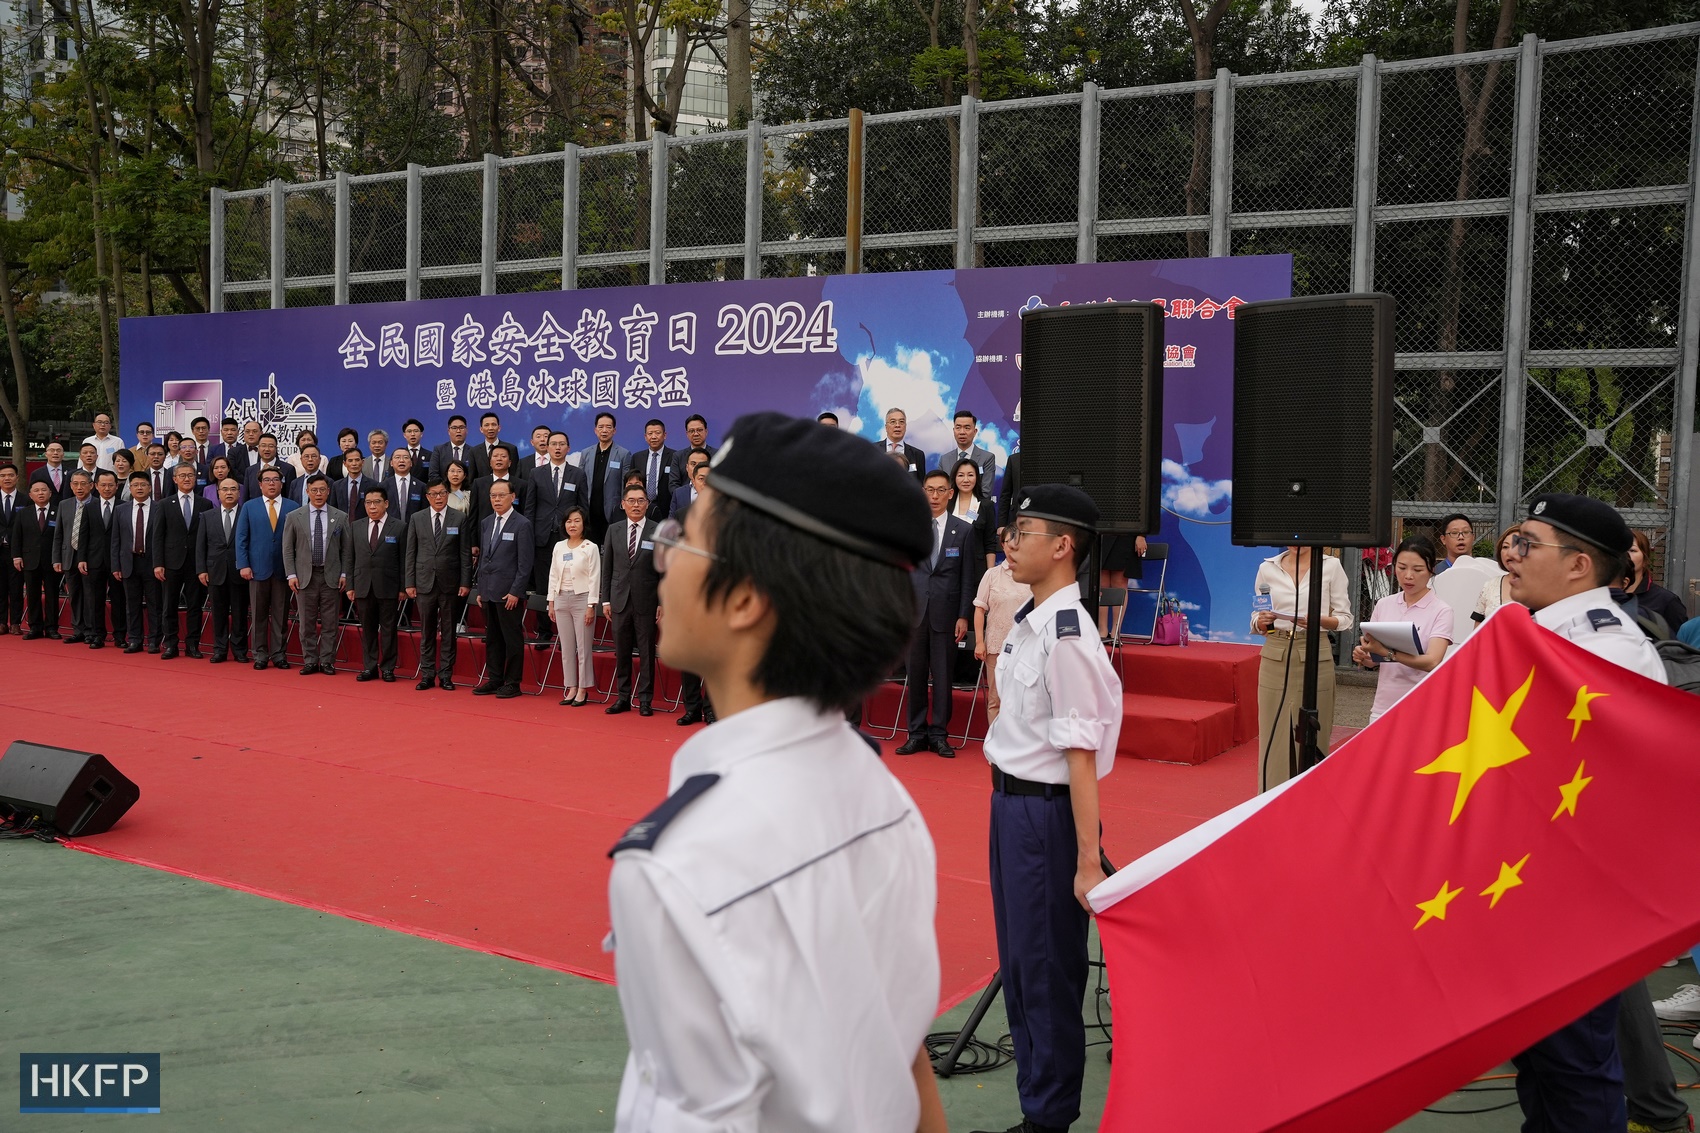 A carnival featuring booths about national security and showcasing police's armoured vehicles at Victoria Park, Causeway Bay, on April 15, 2024 as part of the activities of National Security Education Day, Photo: Kyle Lam/HKFP.